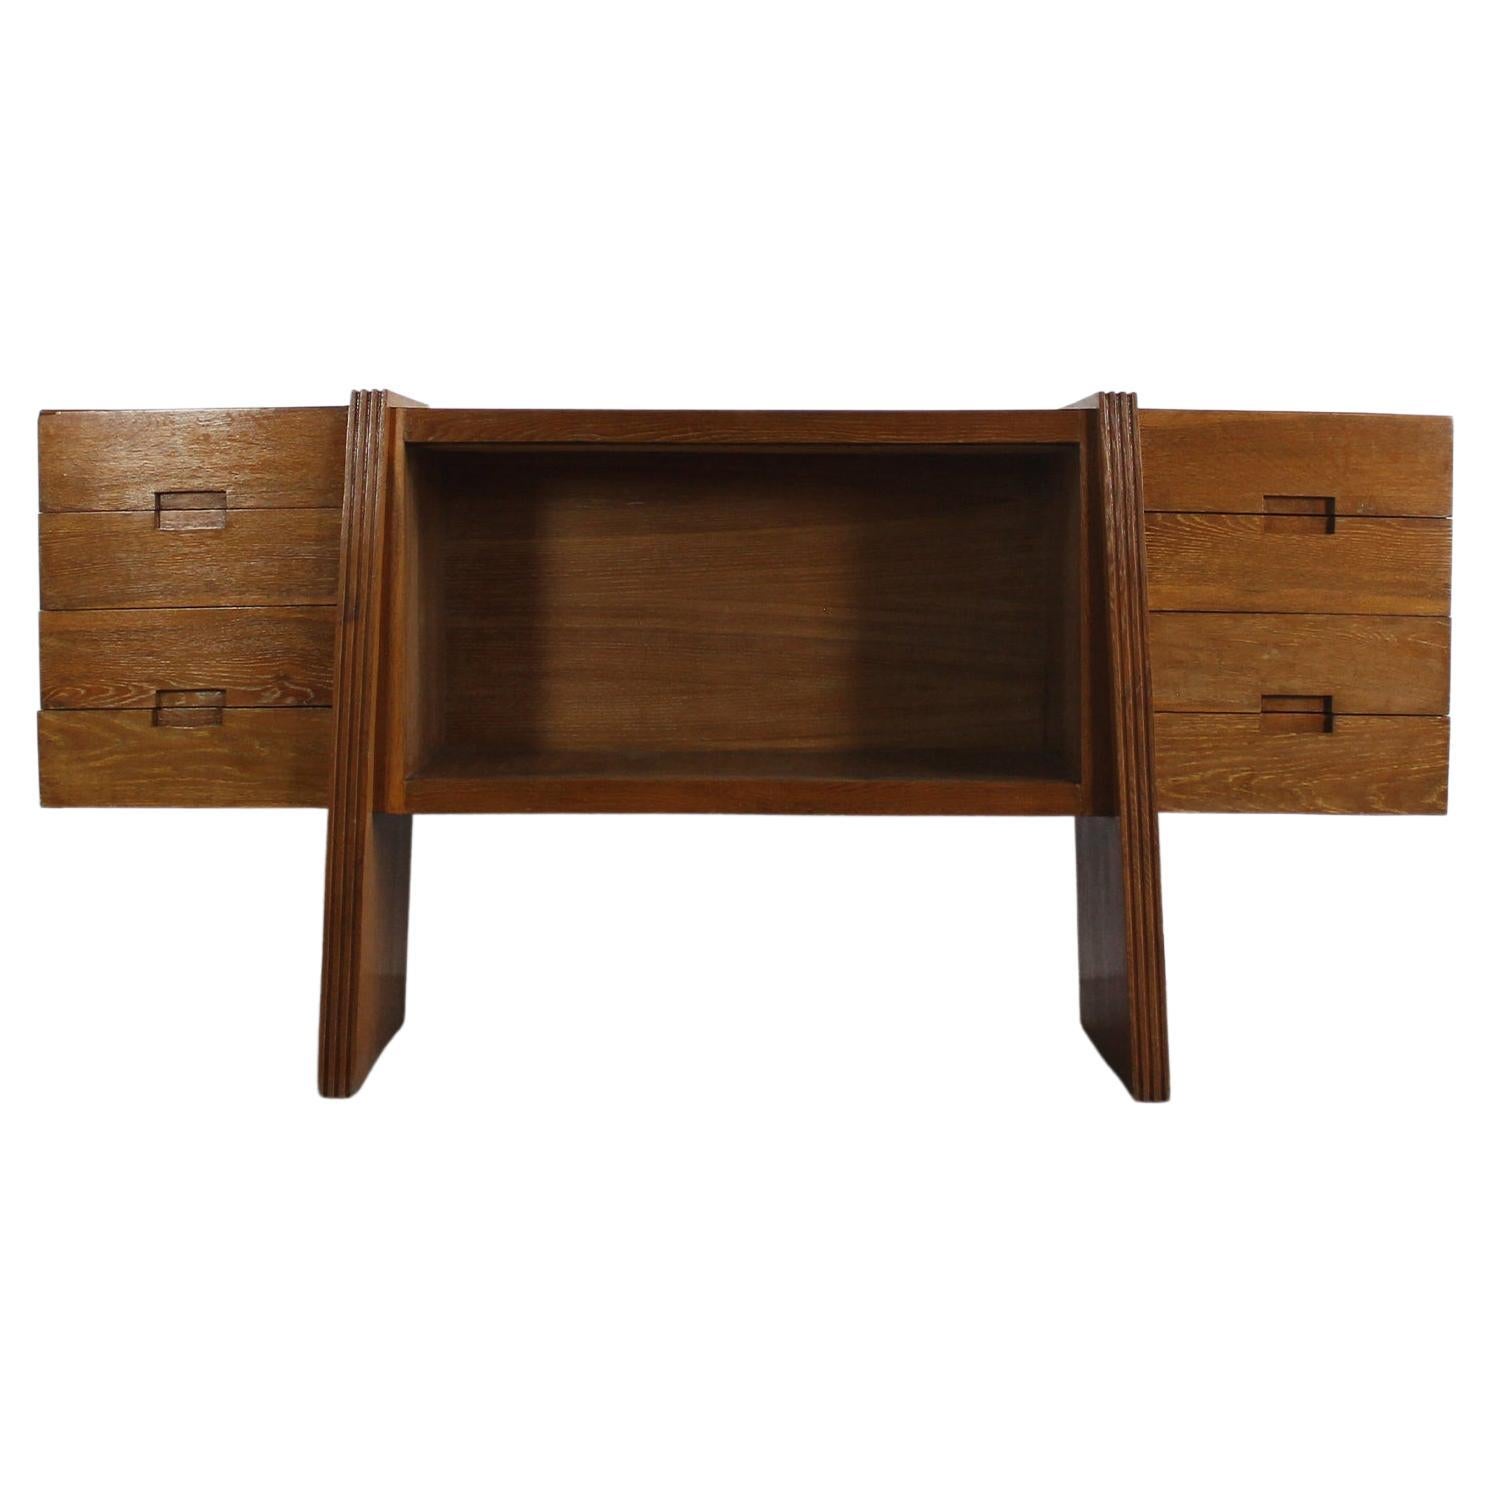 Pier Luigi Colli Large Sideboard in Wood with Drawers Italian Manufacturer 1930s